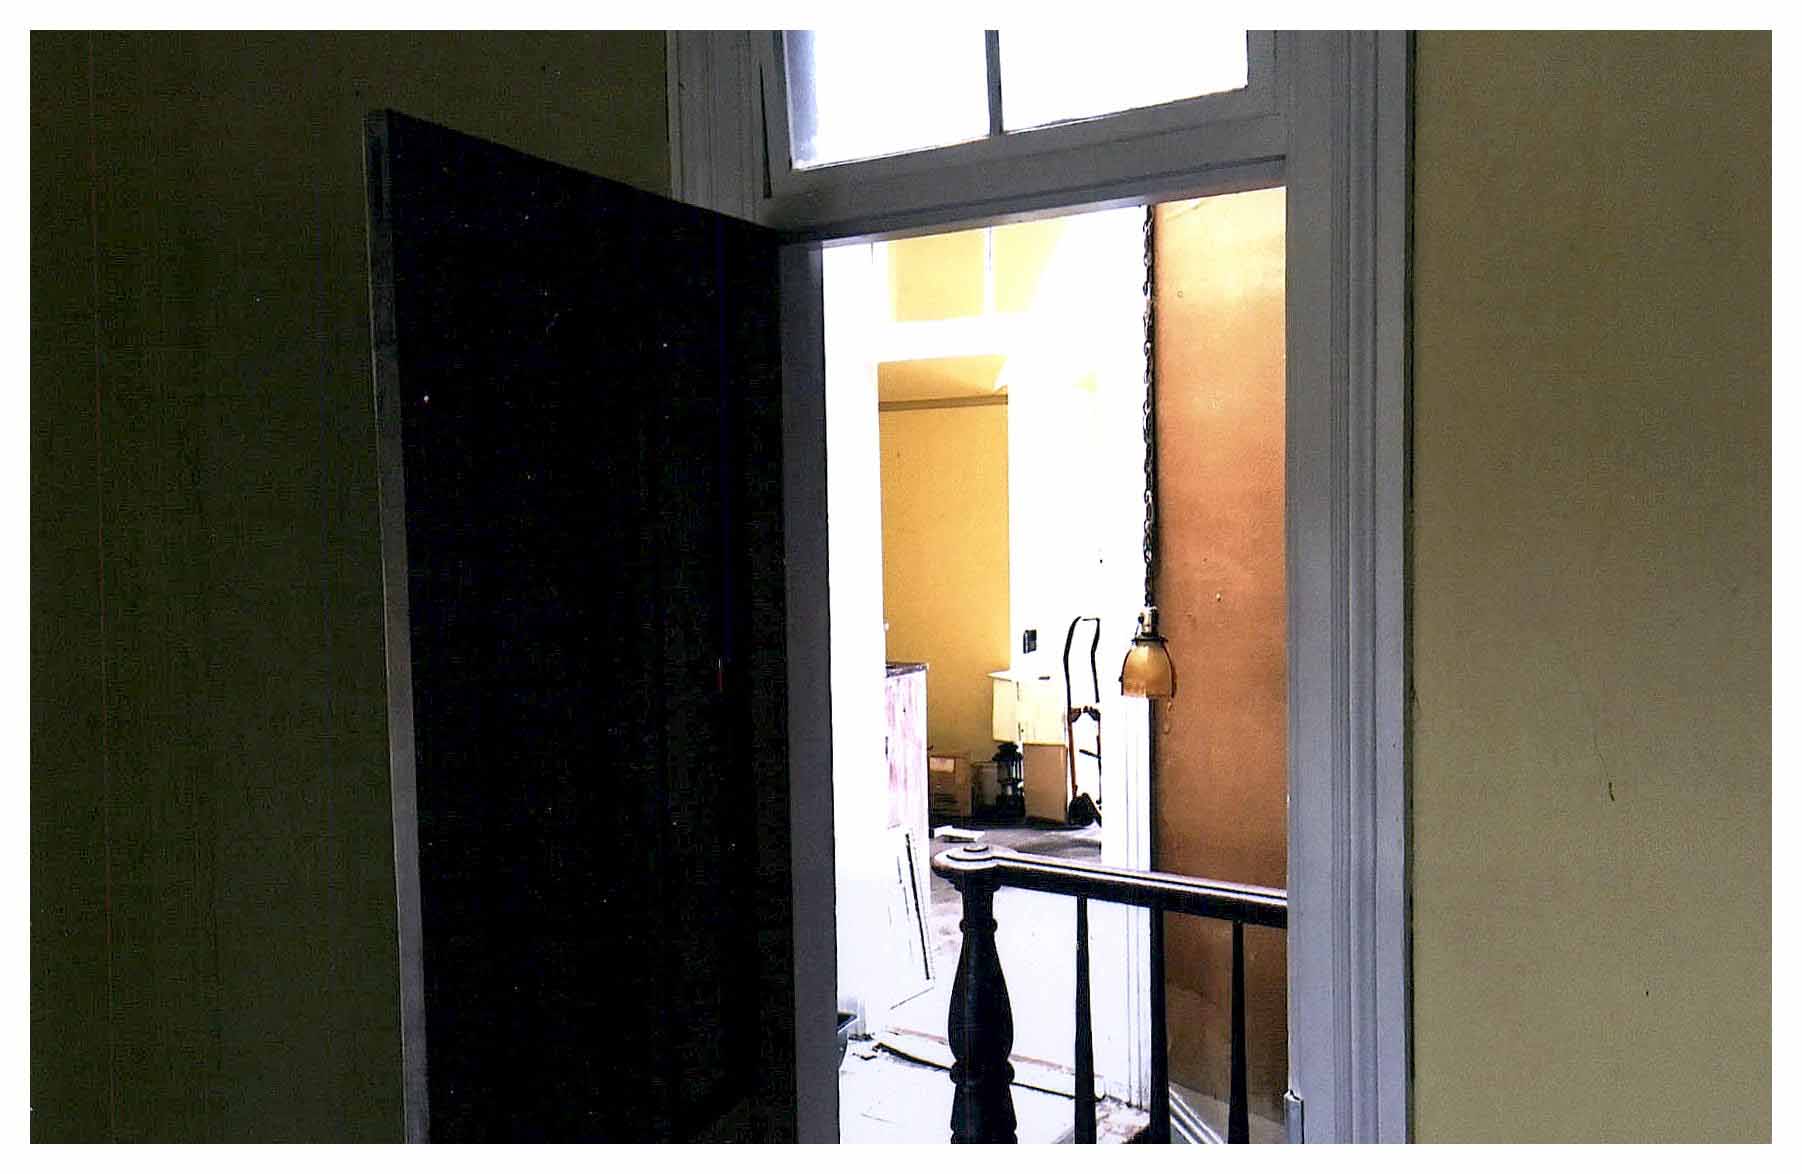 Before: same view looking through bedroom door with darker-colored surfaces and noticeably less light.